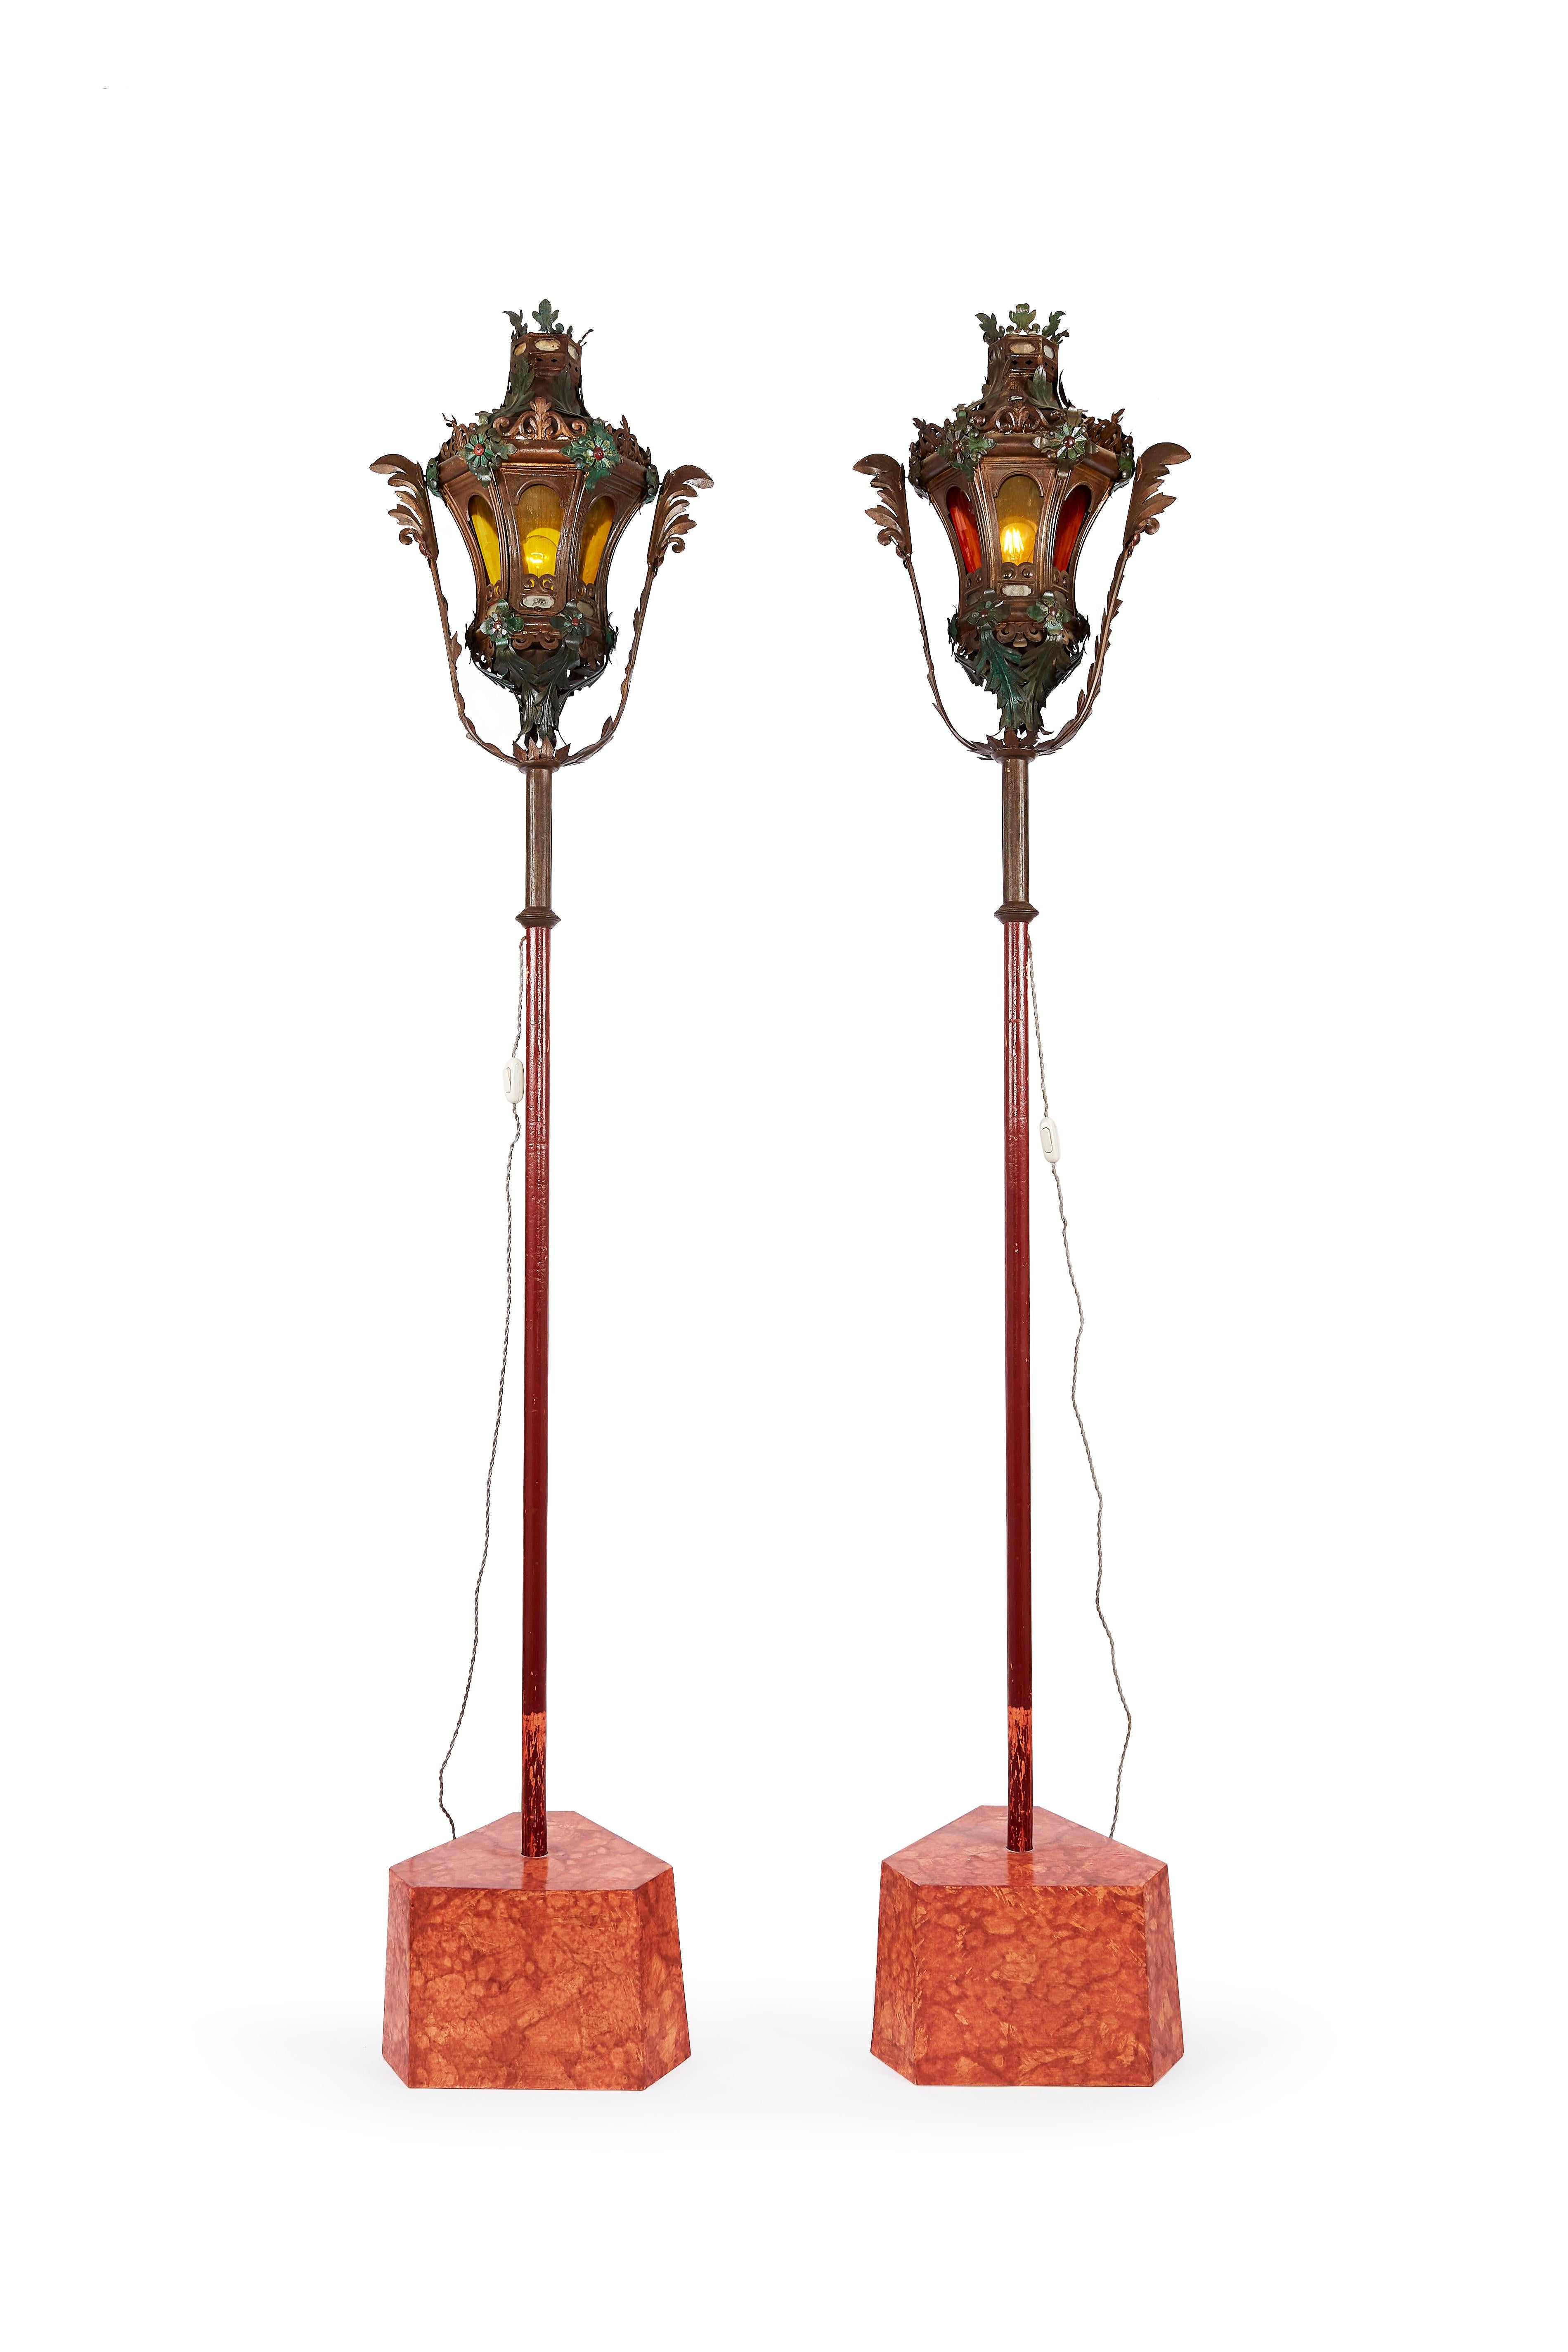 Forged Pair of Venetian Lanterns 19th Century Italian Gondola Lamps Baroque Style For Sale